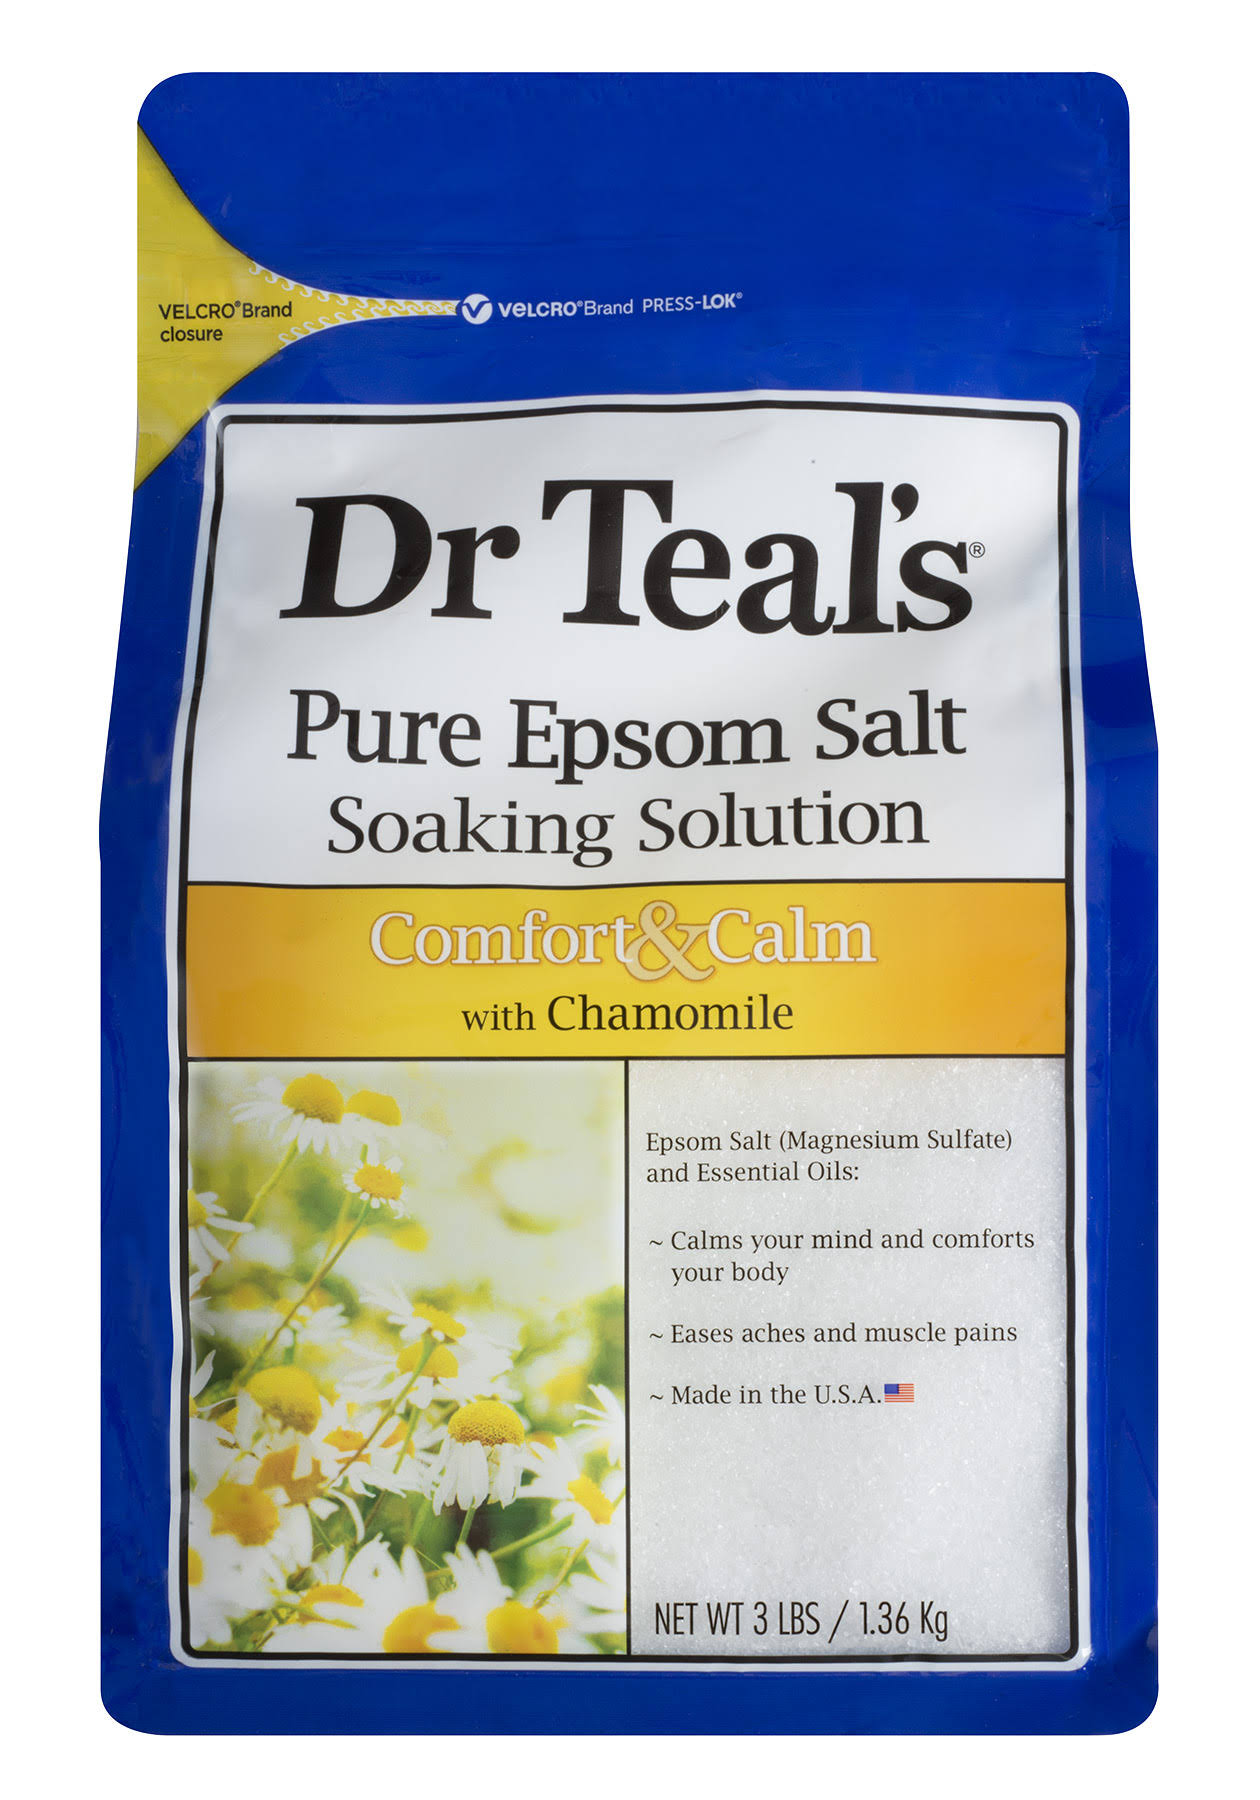 Dr Teal's Pure Epsom Salt Soaking Solution - Comfort & Calm with Chamomile, 3lb